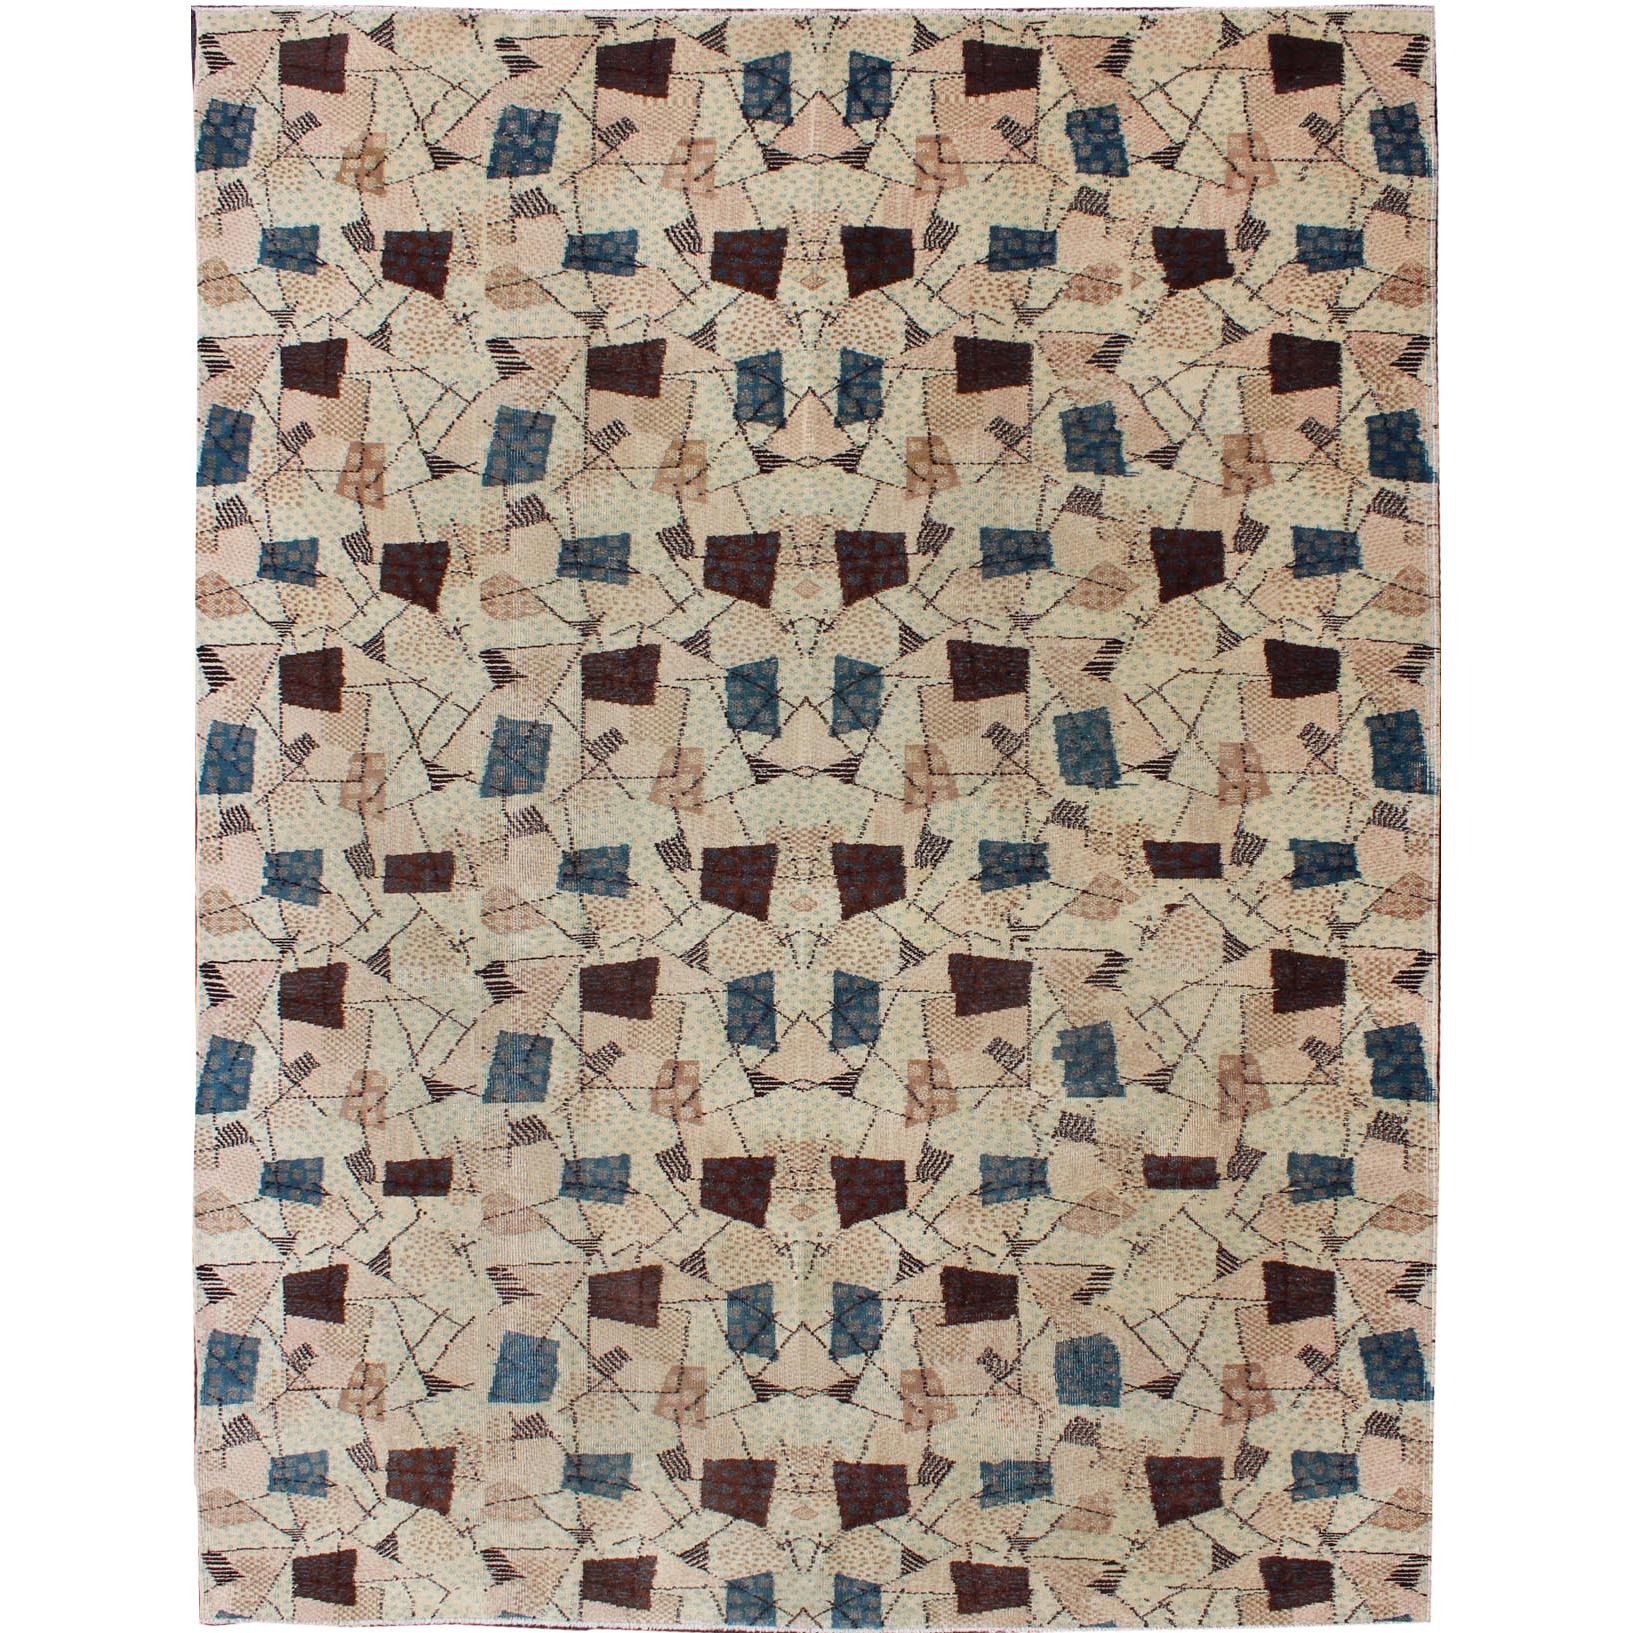 Vintage Turkish rug with Mid-Century Modern Design in Dusty Blue, Brown, L.Green For Sale